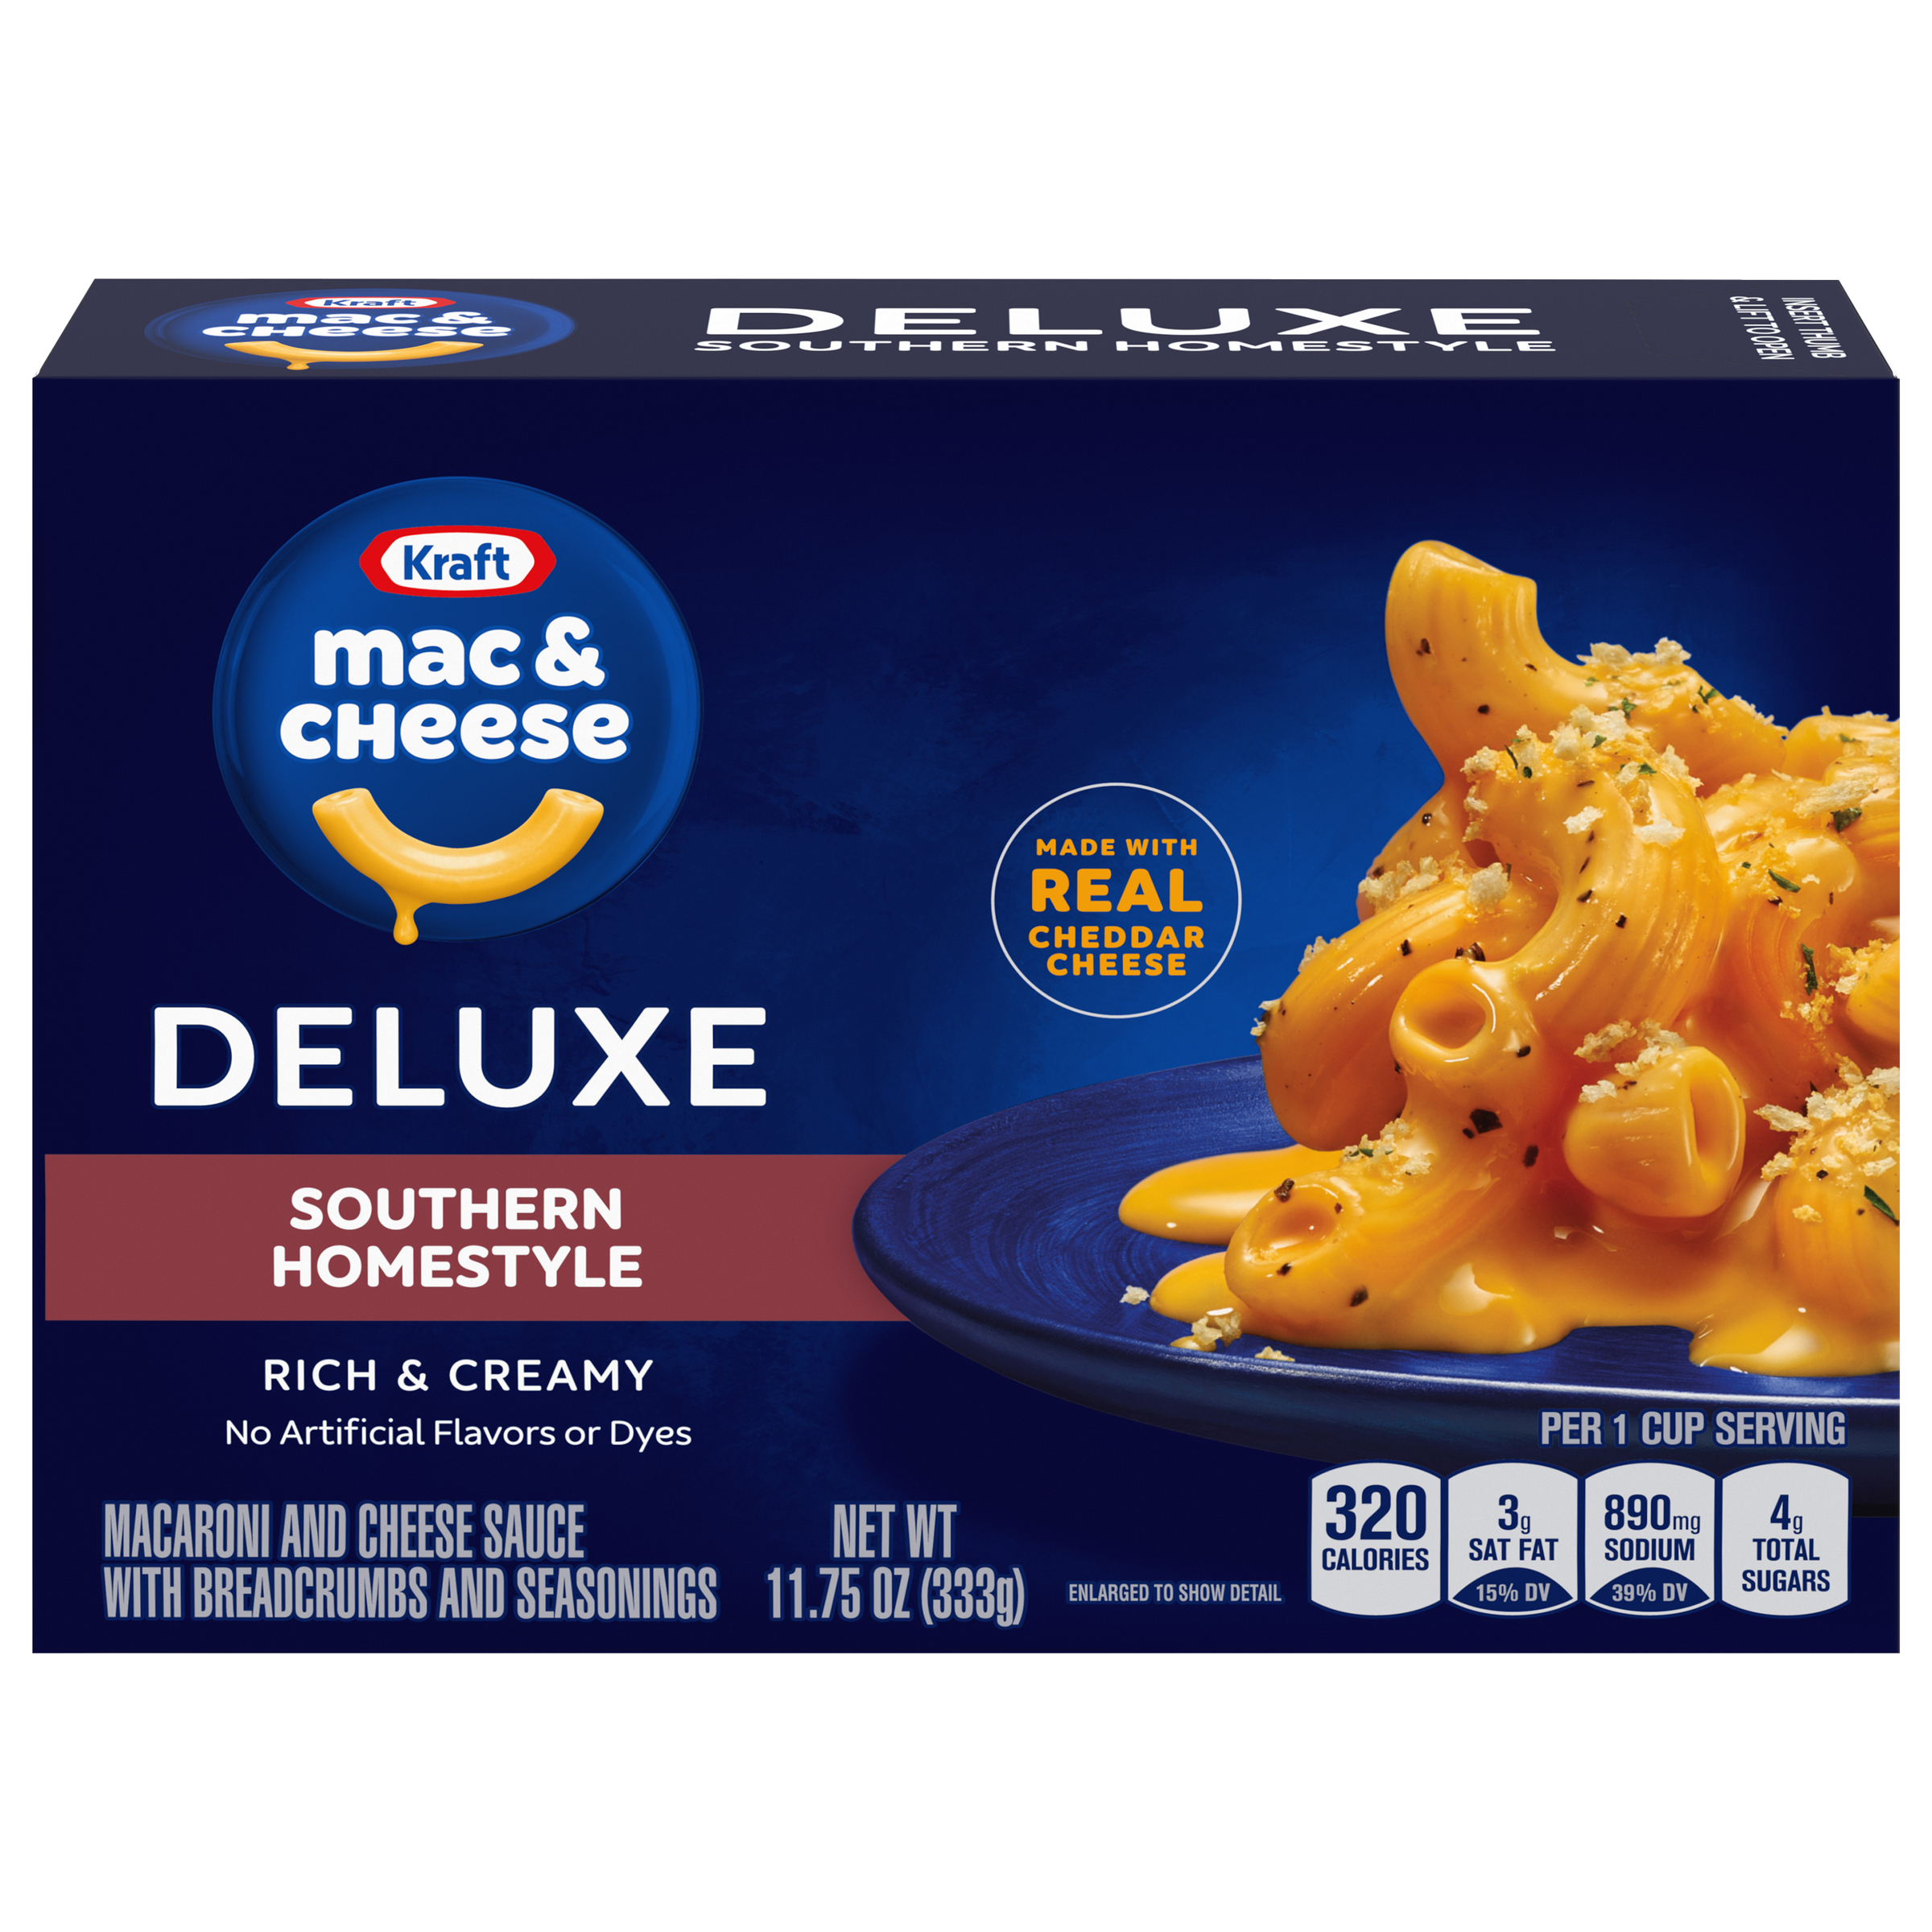 http://cdn.allotta.io/image/upload/v1693835712/dxp-images/kmc/products/southern-homestyle-mac--cheese-macaroni-and-cheese-dinner-00021000081479-en-US.png